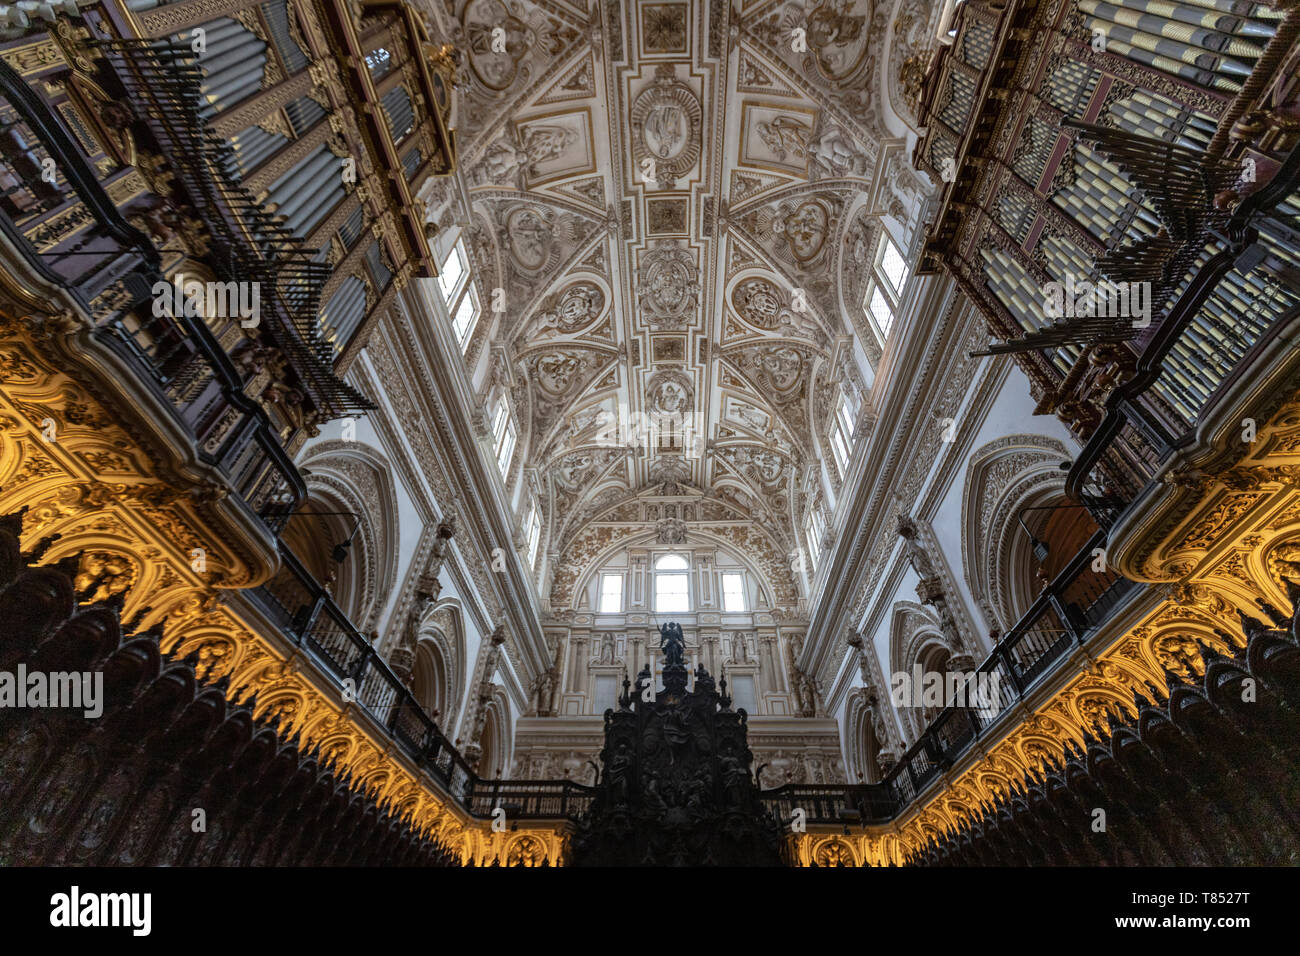 Organ and Choir in Catholic Cathedral of Our Lady of the Assumption in the Mosque–Cathedral of Córdoba, Mezquita Cordoba, Andalusia, Spain Stock Photo